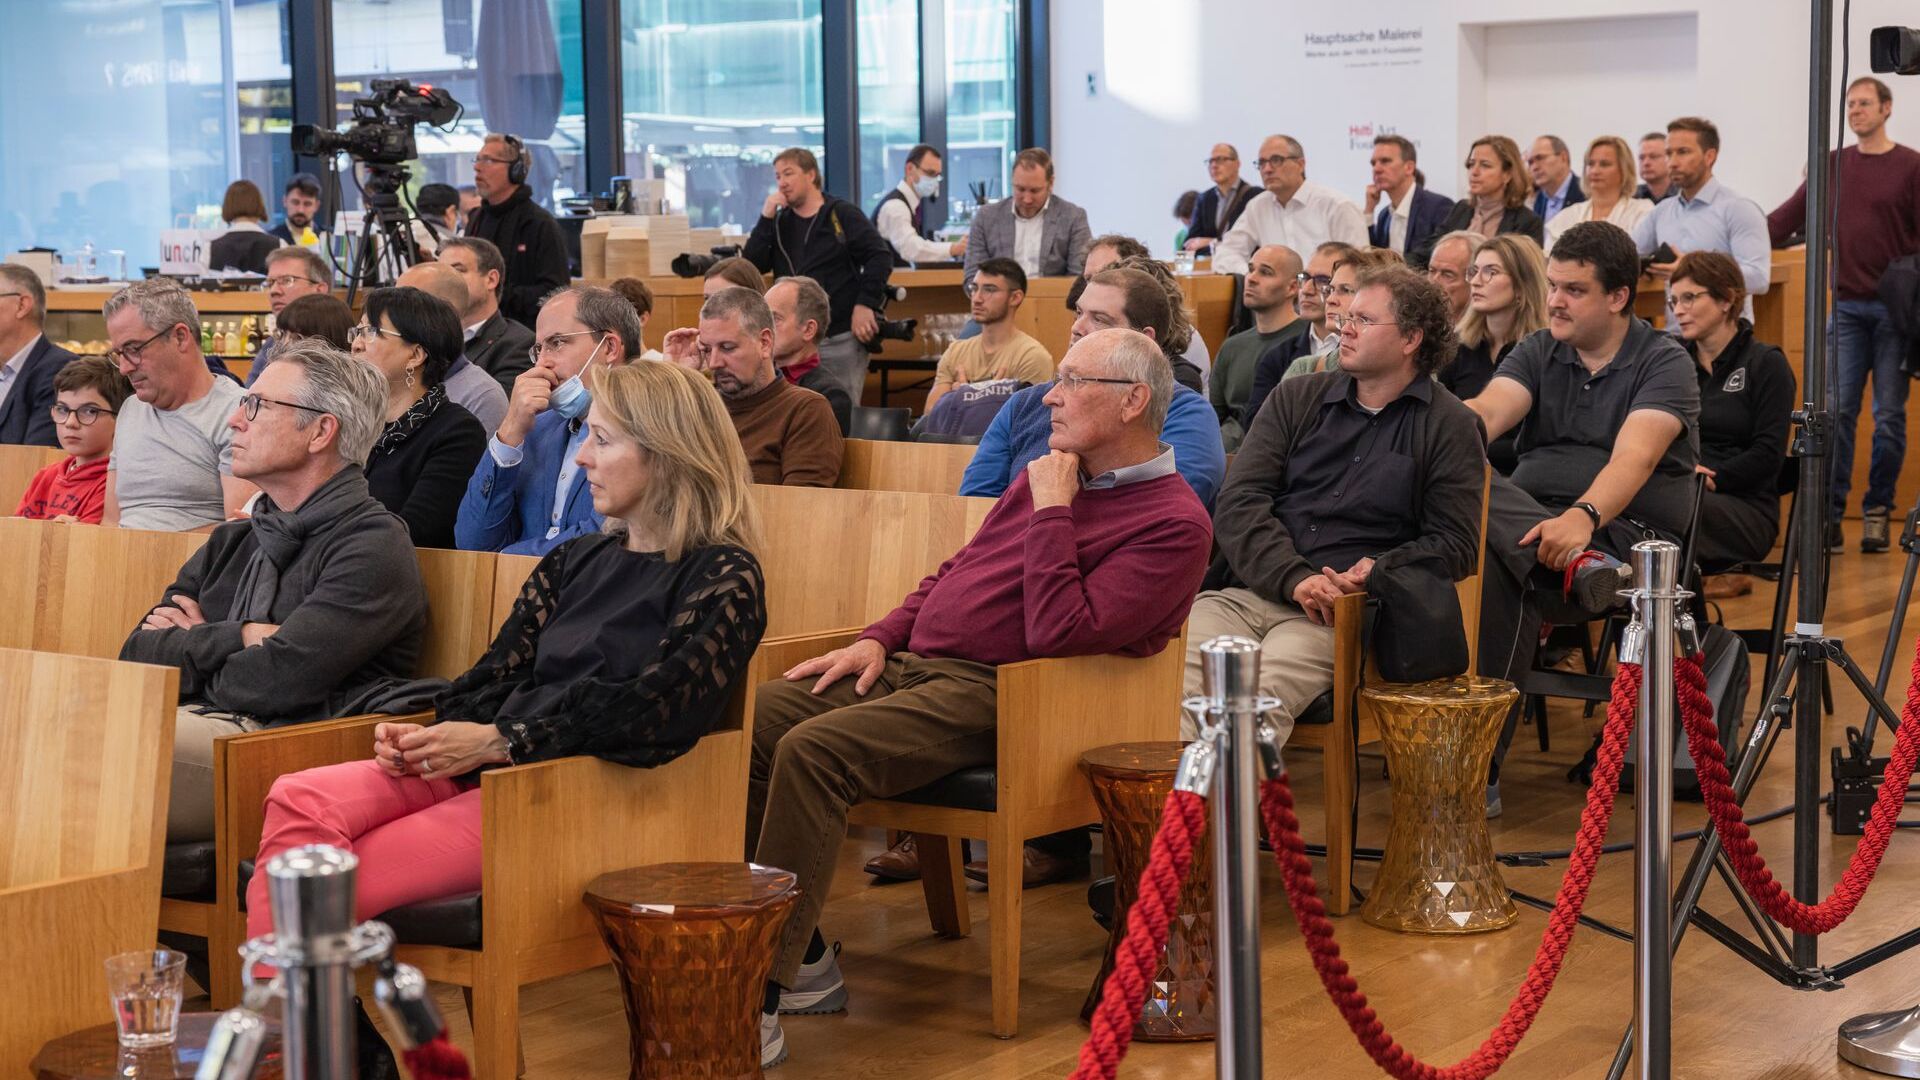 The "Digitaltag Vaduz", welcomed by the Kunstmuseum of the capital of the Principality of Liechtenstein on Saturday 6 November 2021, aroused the enthusiasm of the public and speakers in analogy with the "Digital Day Switzerland" of the following day 10